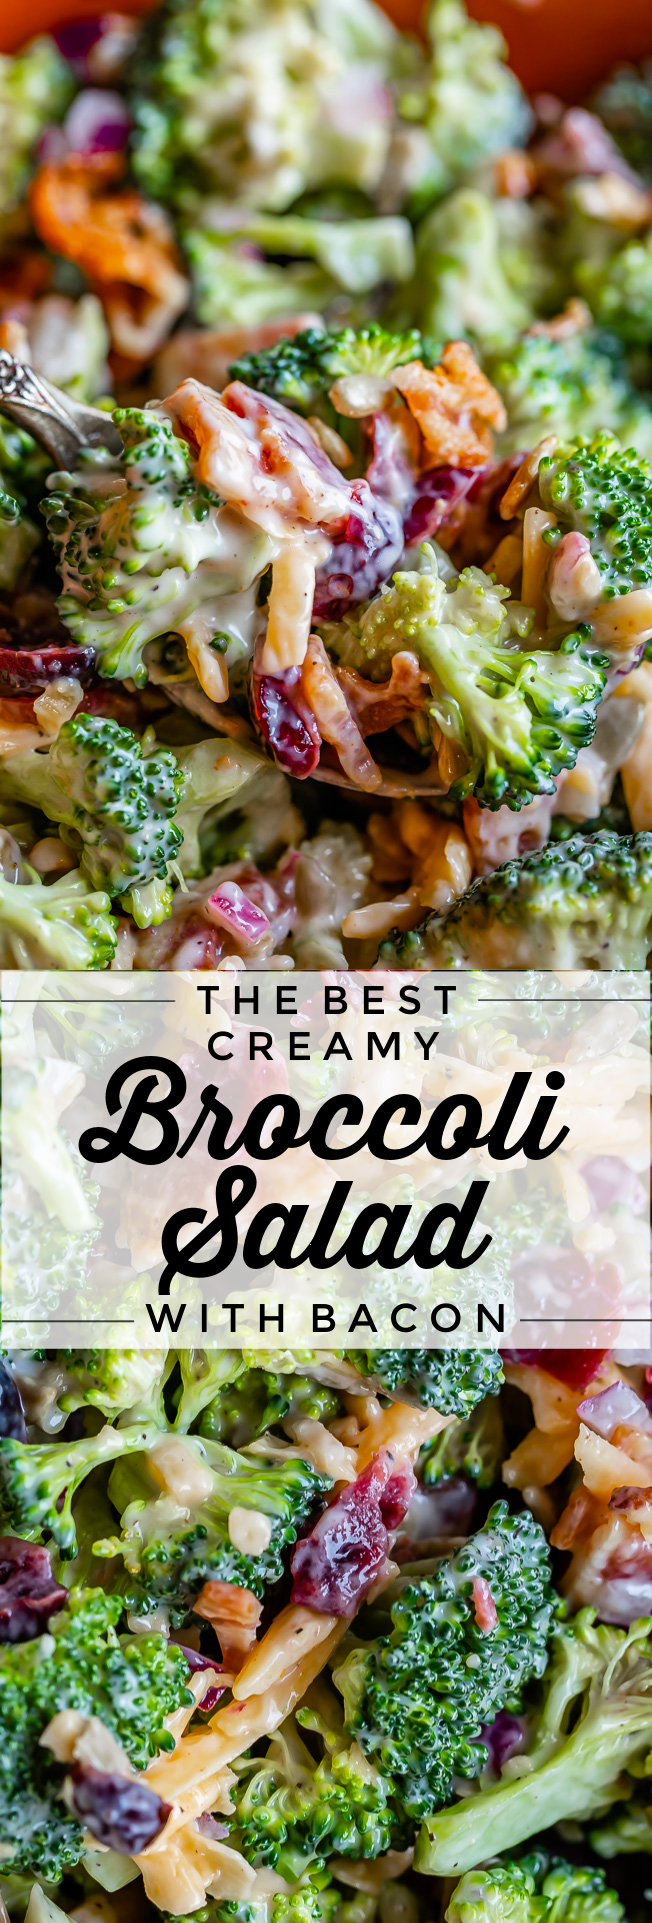 Easy Broccoli Bacon Salad from The Food Charlatan -   19 thanksgiving side dishes crockpot ideas